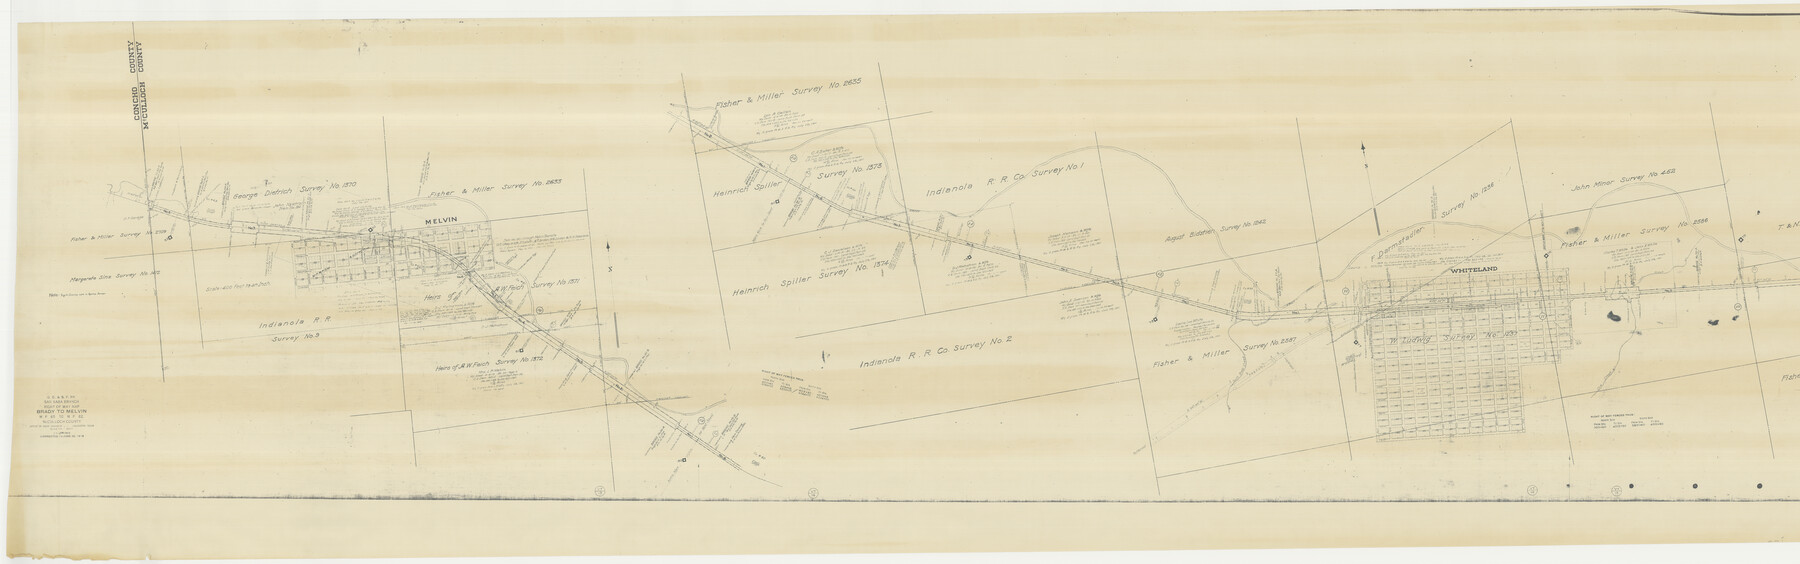 61420, G. C. & S. F. Ry., San Saba Branch, Right of Way Map, Brady to Melvin, General Map Collection